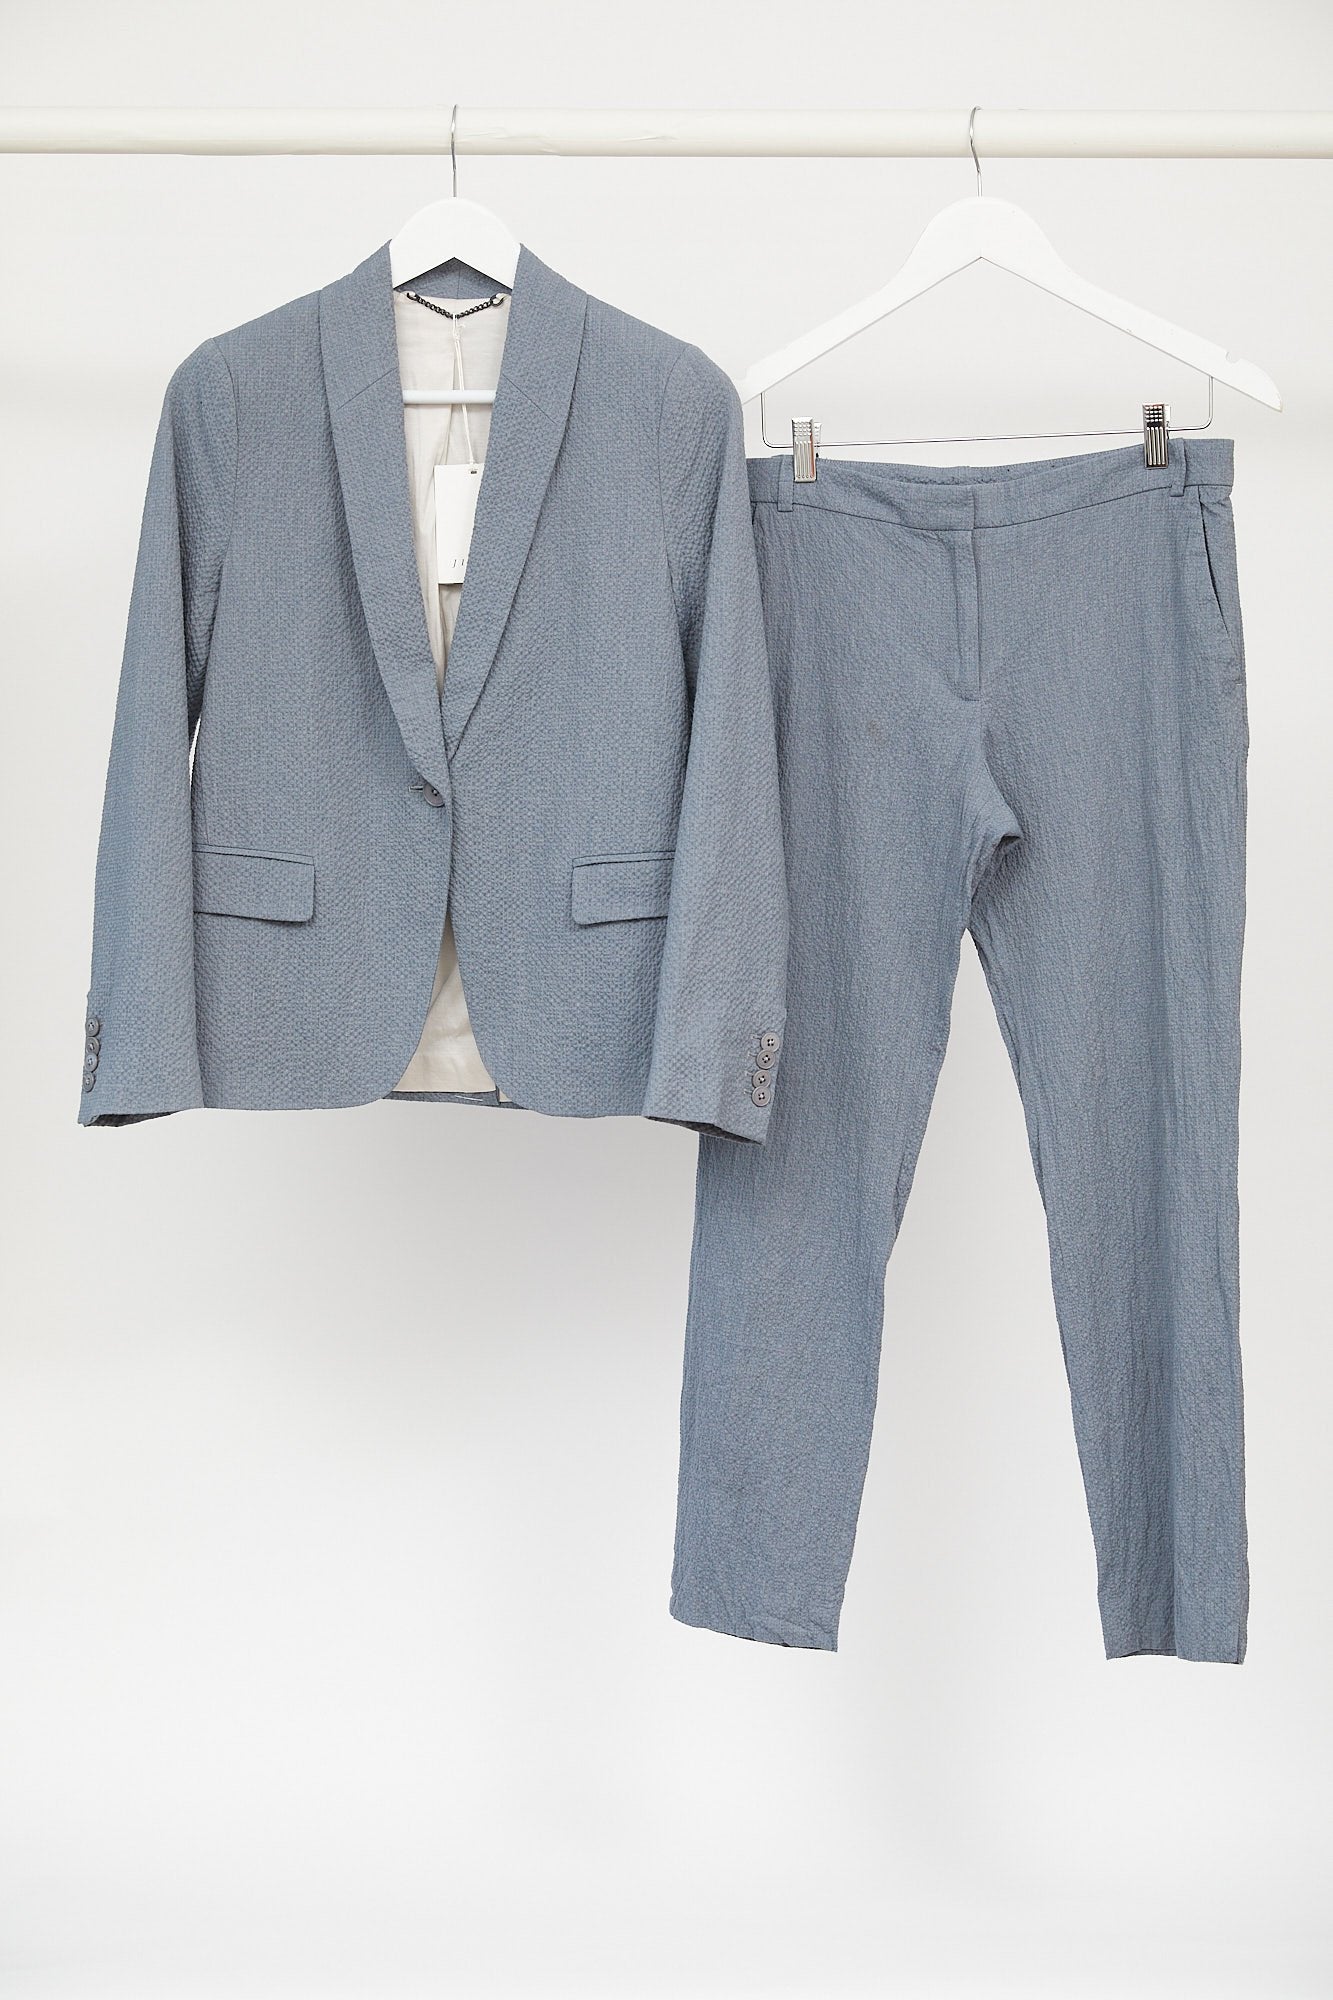 Womens Grey Jigsaw Trousers: Size 10 or Small